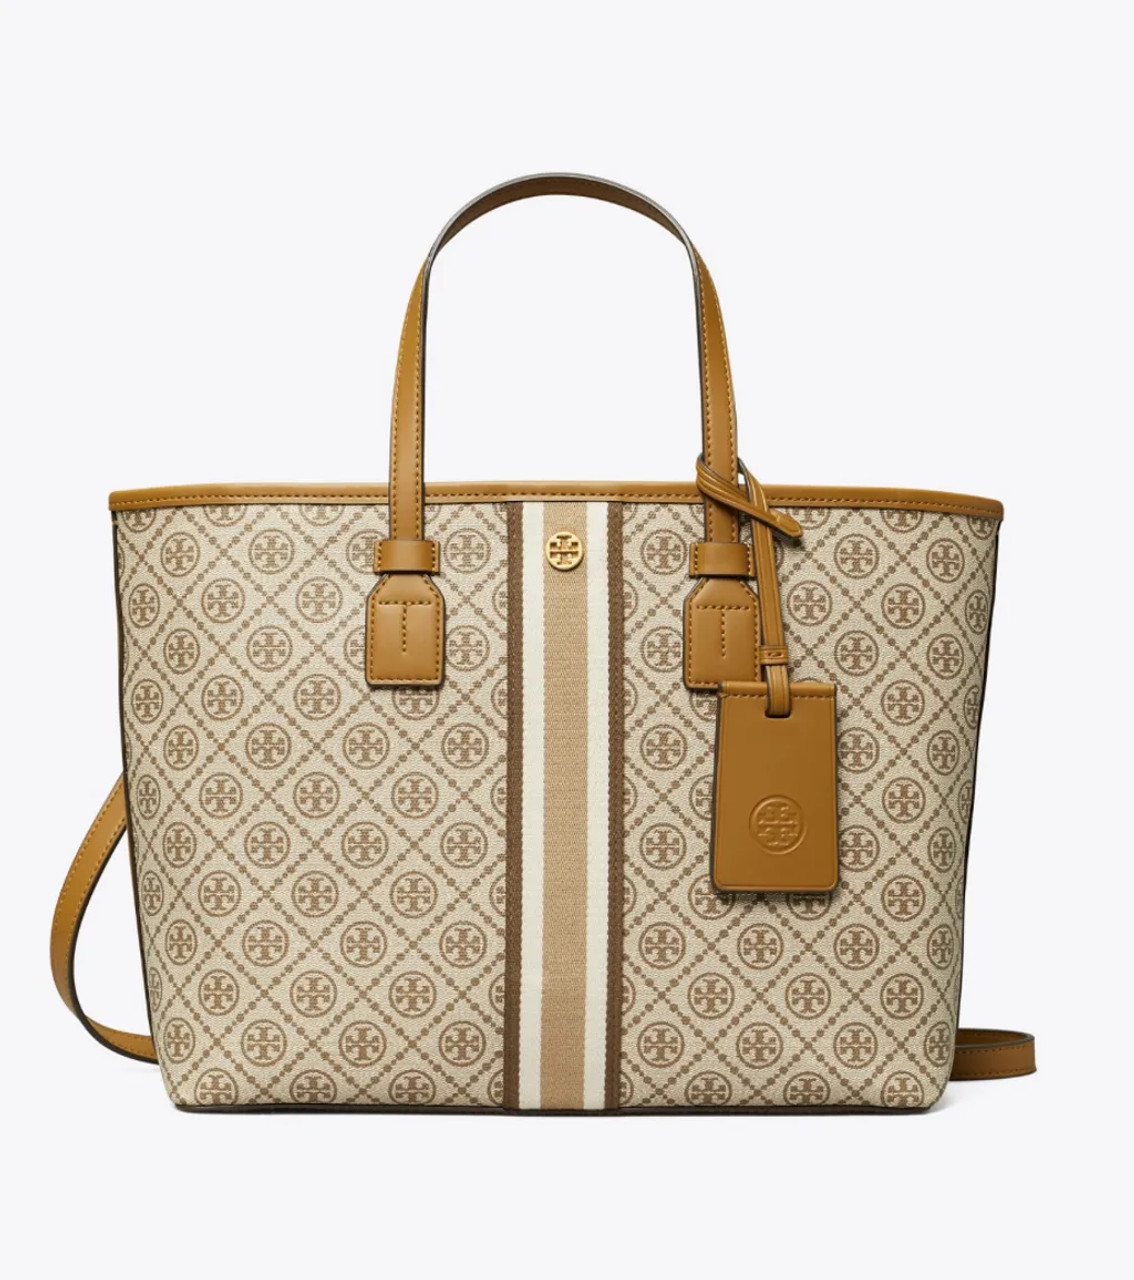 Tory Burch T-monogram Coated Canvas Tote - Neutrals